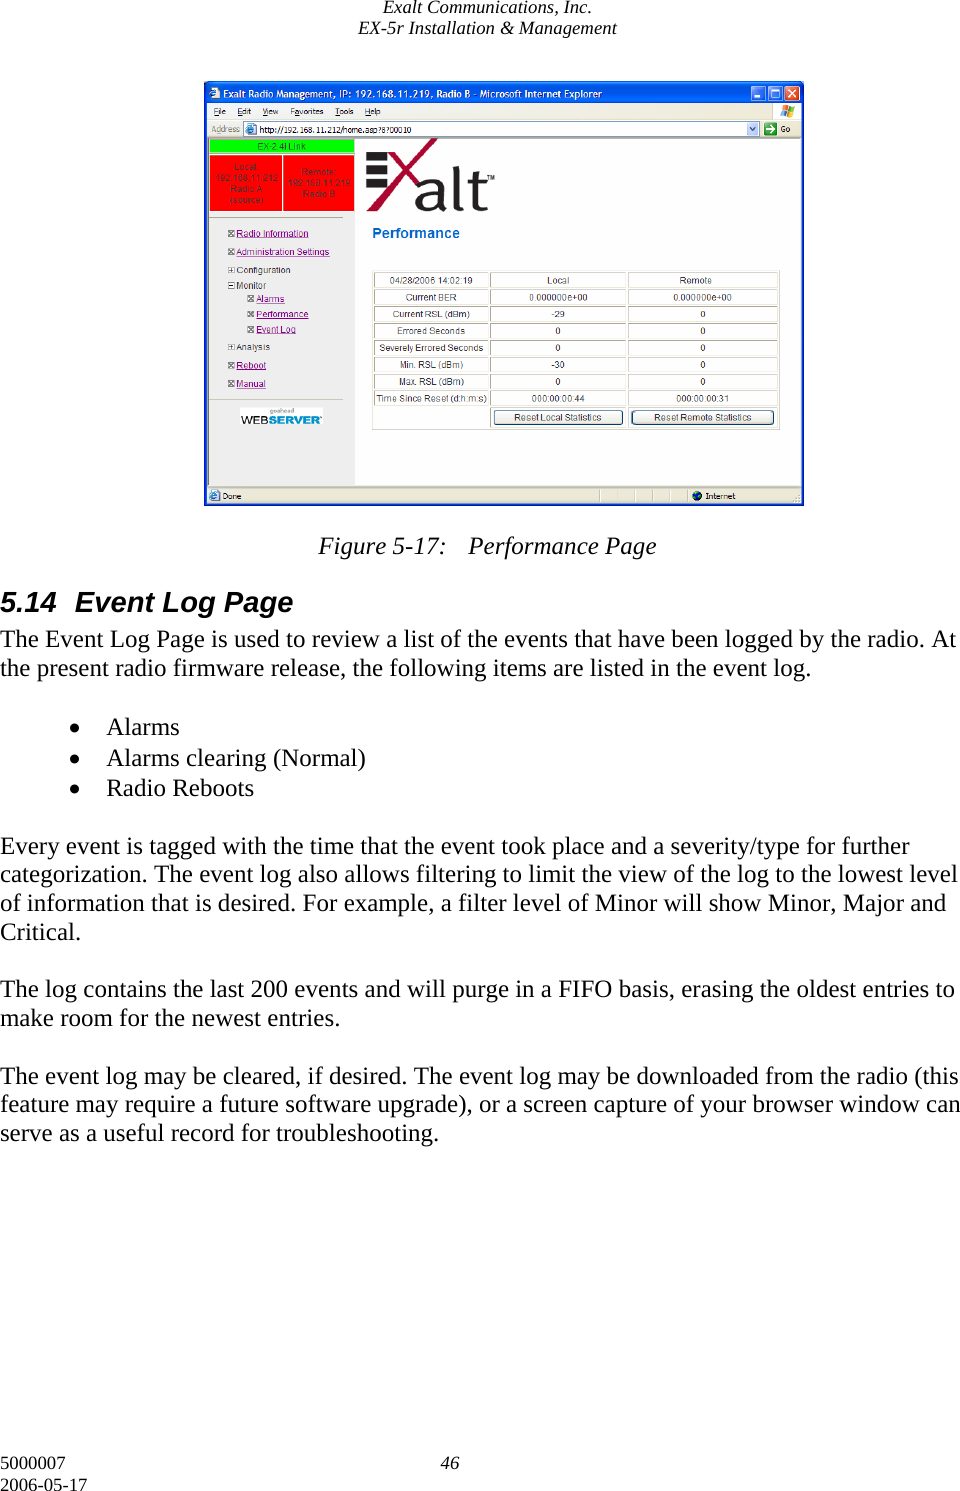 Exalt Communications, Inc. EX-5r Installation &amp; Management 5000007  46 2006-05-17                 Figure 5-17:  Performance Page 5.14  Event Log Page The Event Log Page is used to review a list of the events that have been logged by the radio. At the present radio firmware release, the following items are listed in the event log.  • Alarms • Alarms clearing (Normal) • Radio Reboots  Every event is tagged with the time that the event took place and a severity/type for further categorization. The event log also allows filtering to limit the view of the log to the lowest level of information that is desired. For example, a filter level of Minor will show Minor, Major and Critical.   The log contains the last 200 events and will purge in a FIFO basis, erasing the oldest entries to make room for the newest entries.  The event log may be cleared, if desired. The event log may be downloaded from the radio (this feature may require a future software upgrade), or a screen capture of your browser window can serve as a useful record for troubleshooting.         